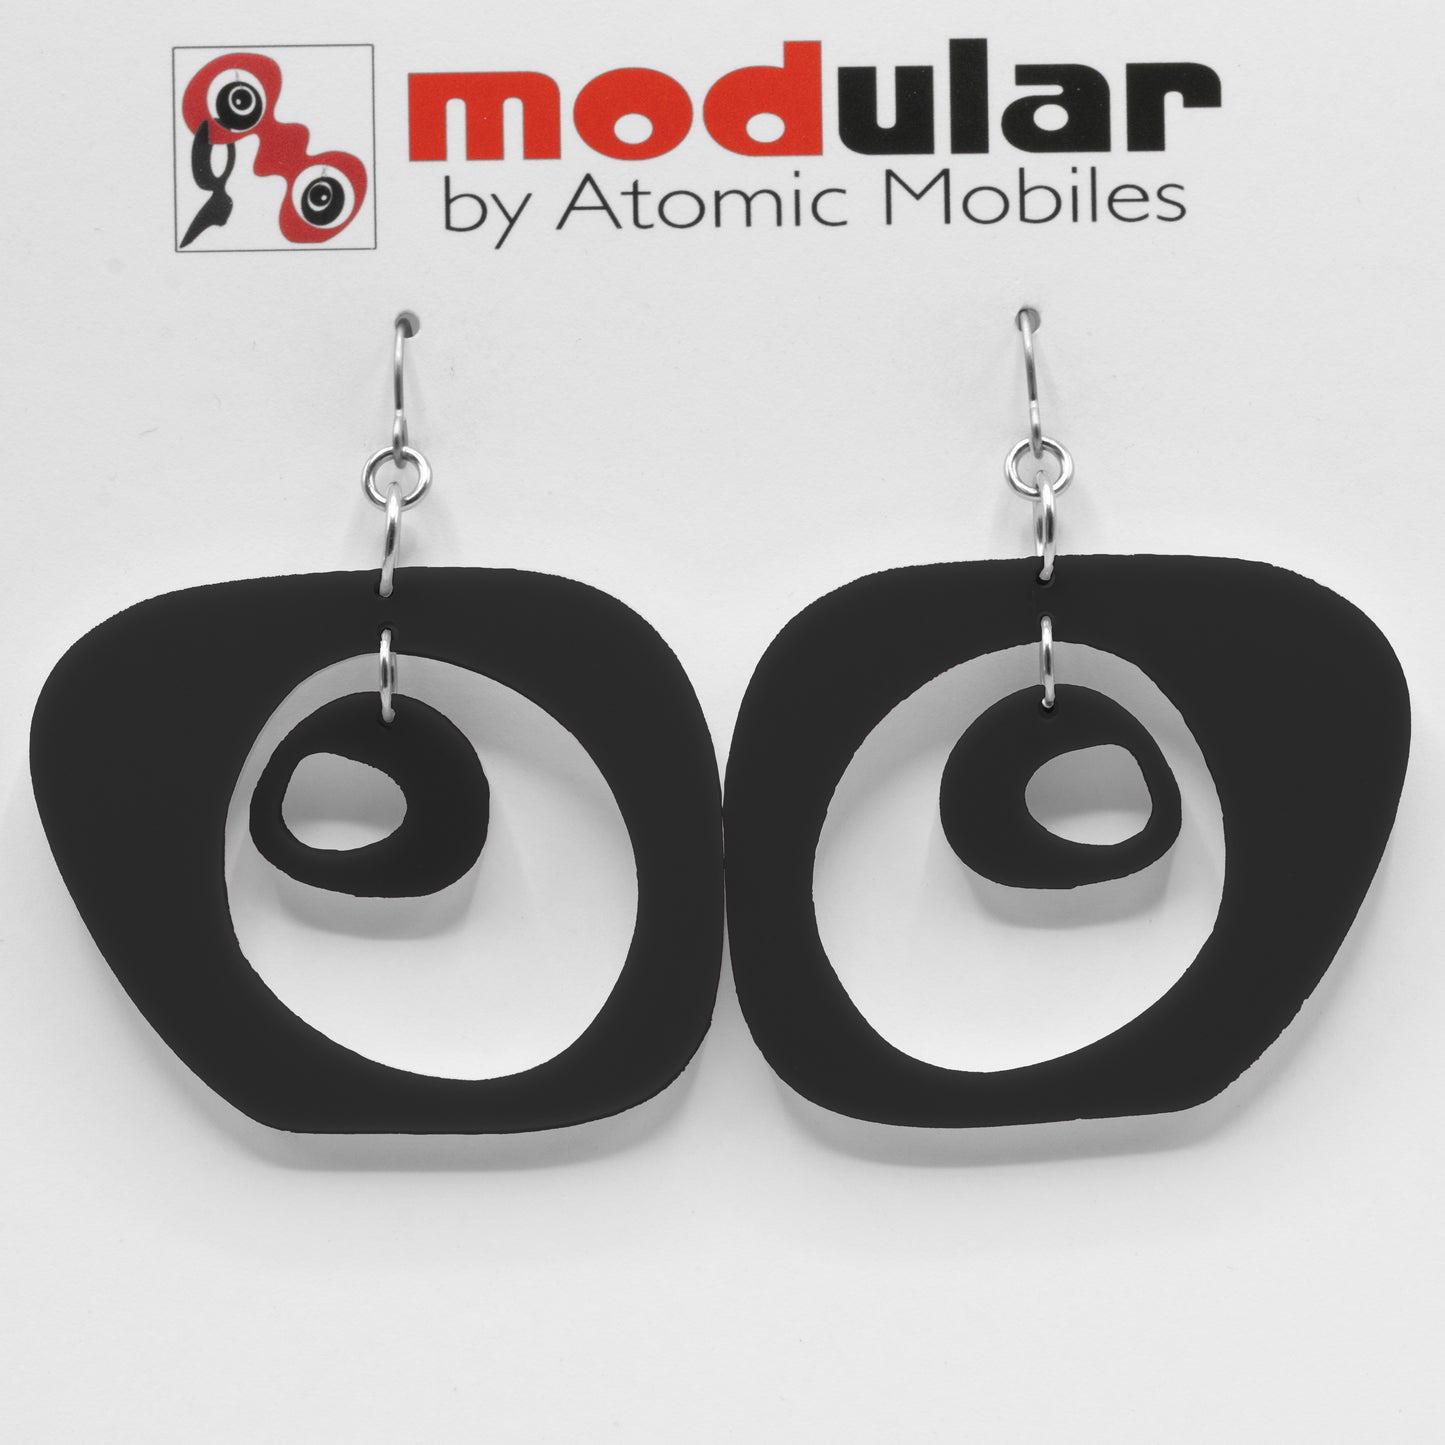 Paris Statement Earrings in Black - modern fashion inspired dangle earrings - handmade mod jewelry by AtomicMobiles.com